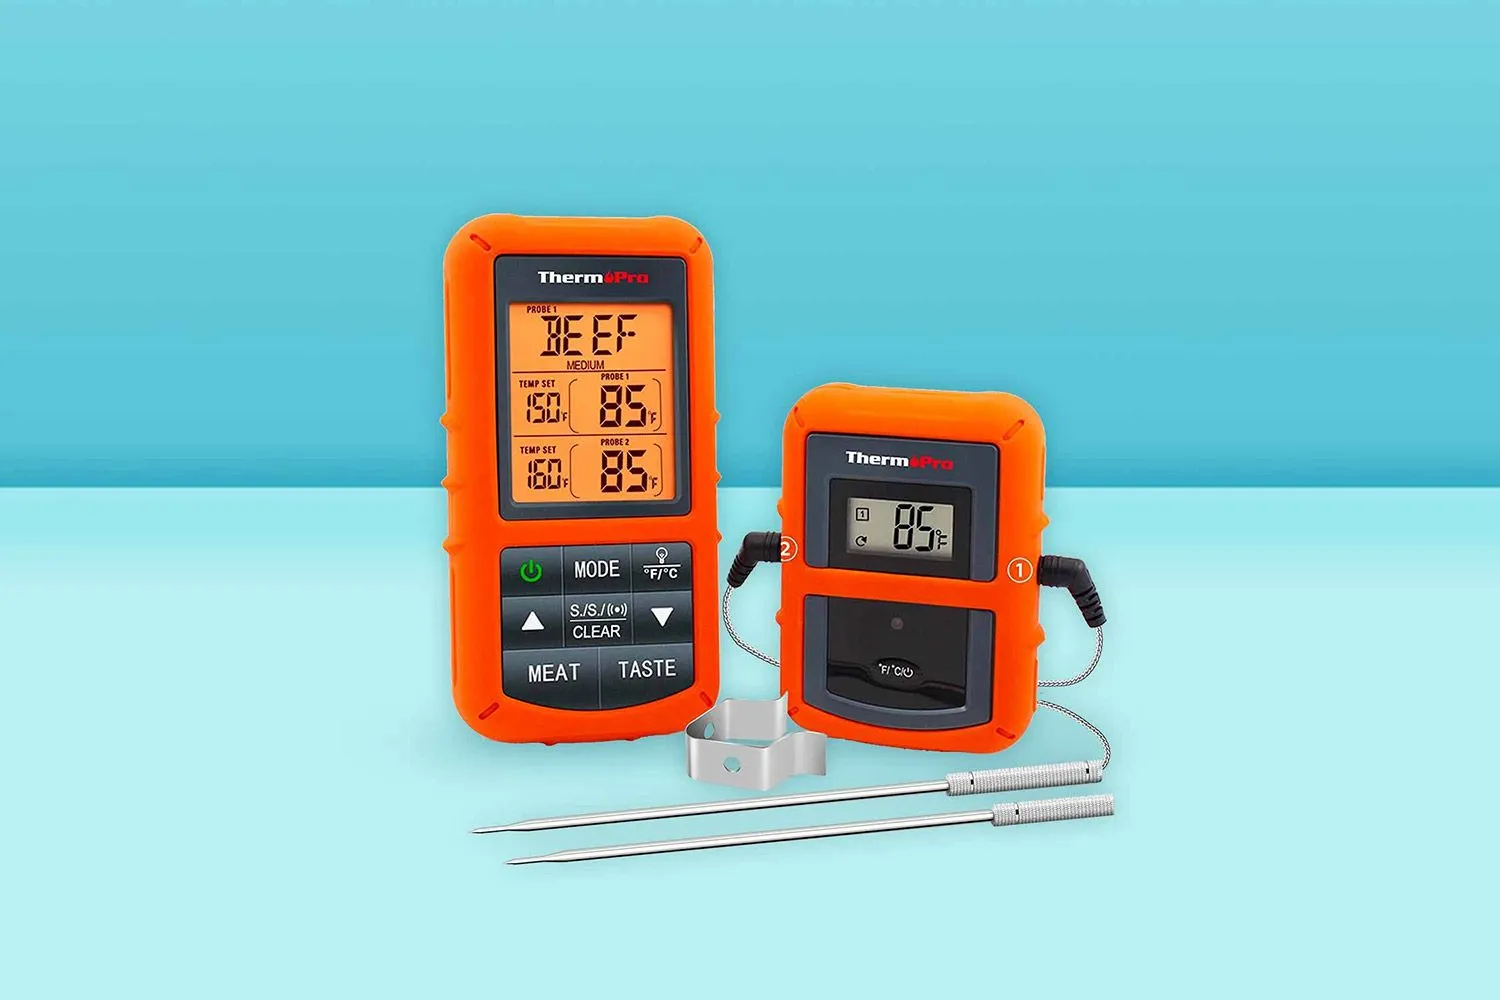 Easy BBQ PRO Smart Wireless BBQ Thermometer With Six Channels & Color-Coded  Probes